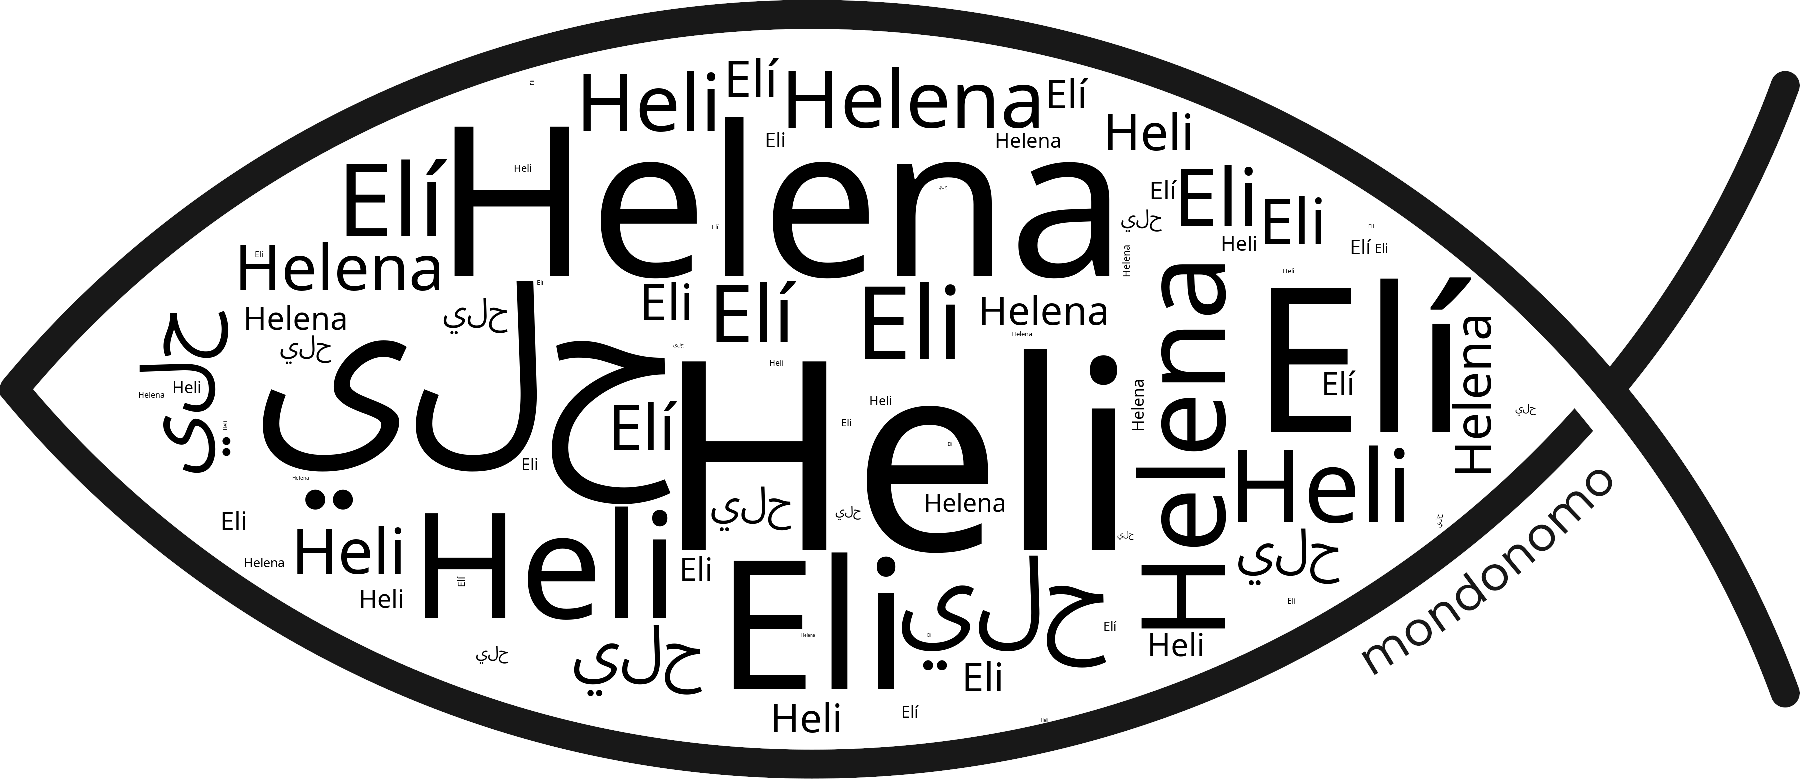 Name Heli in the world's Bibles